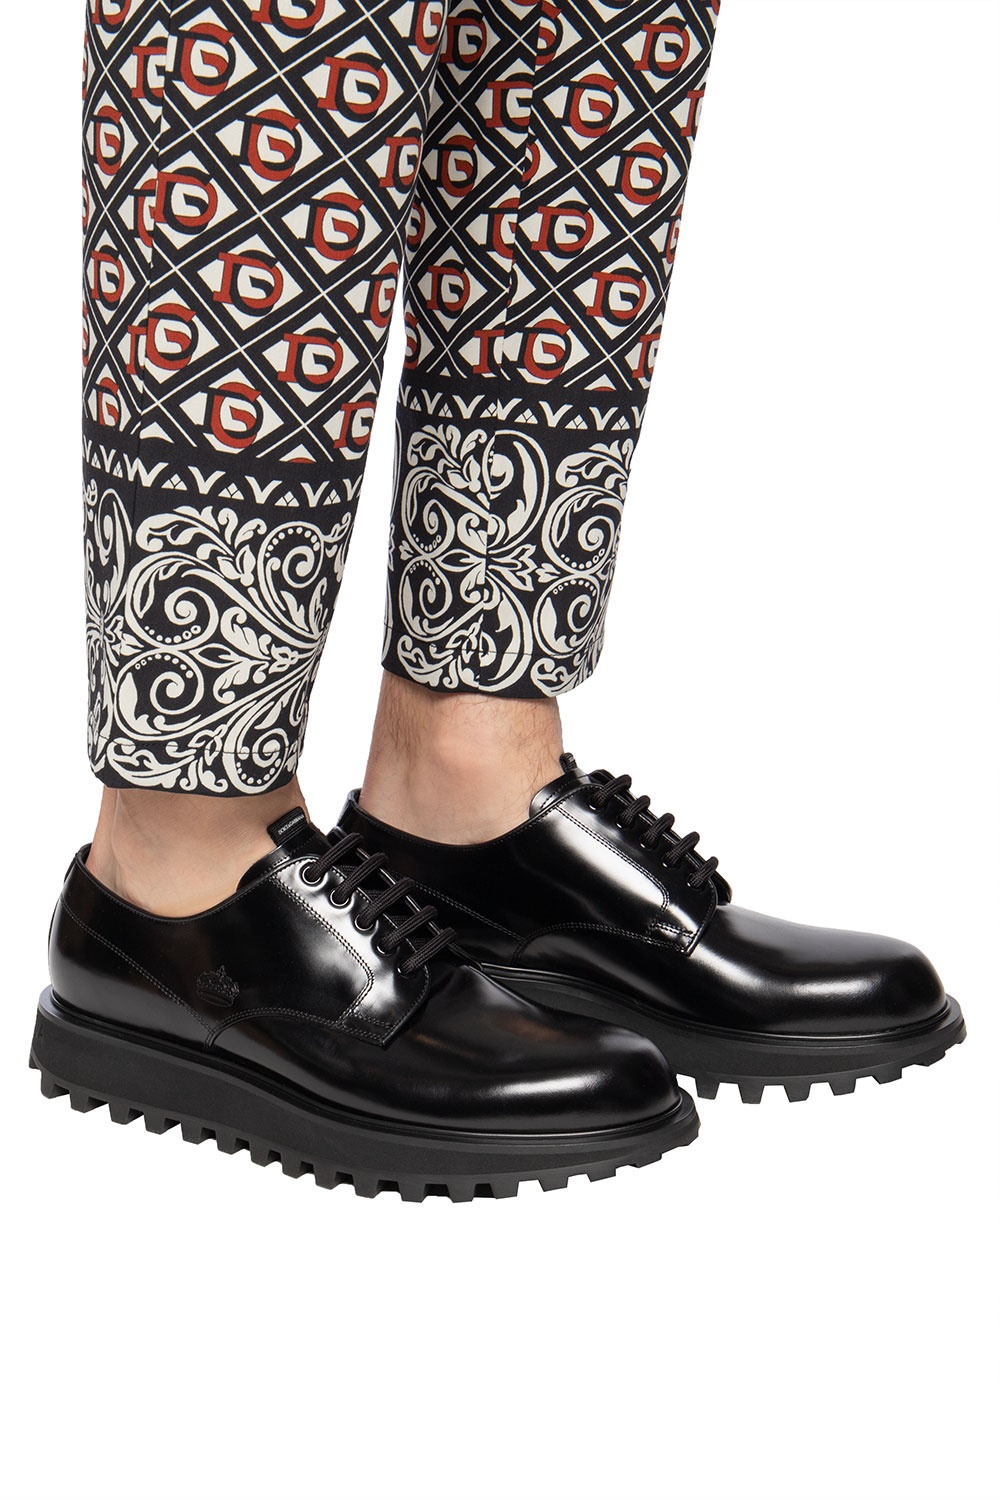 dolce and gabbana derby shoes